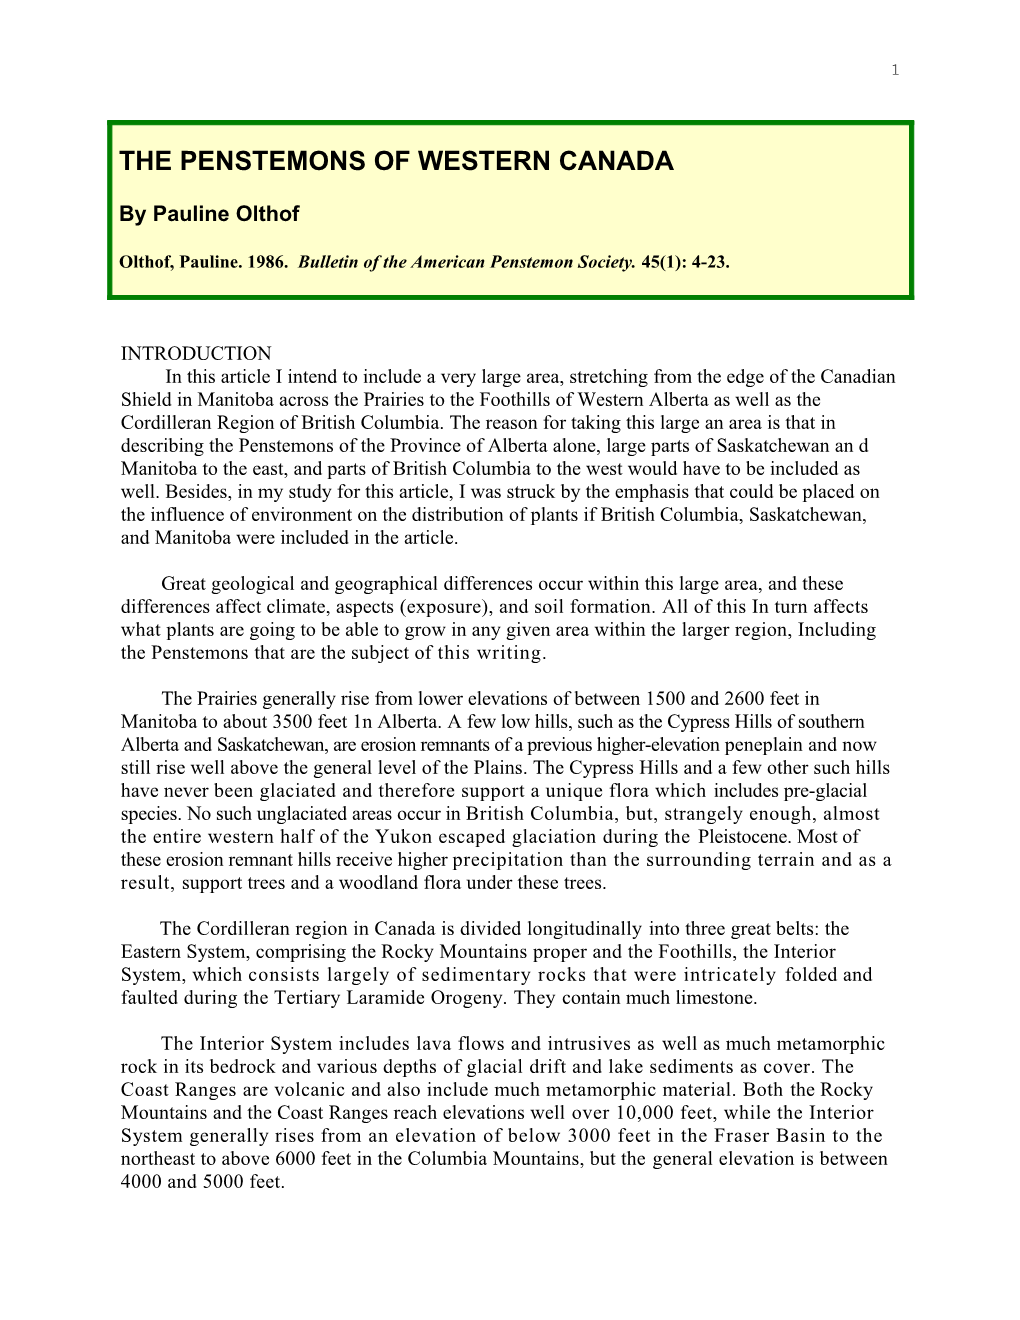 The Penstemons of Western Canada